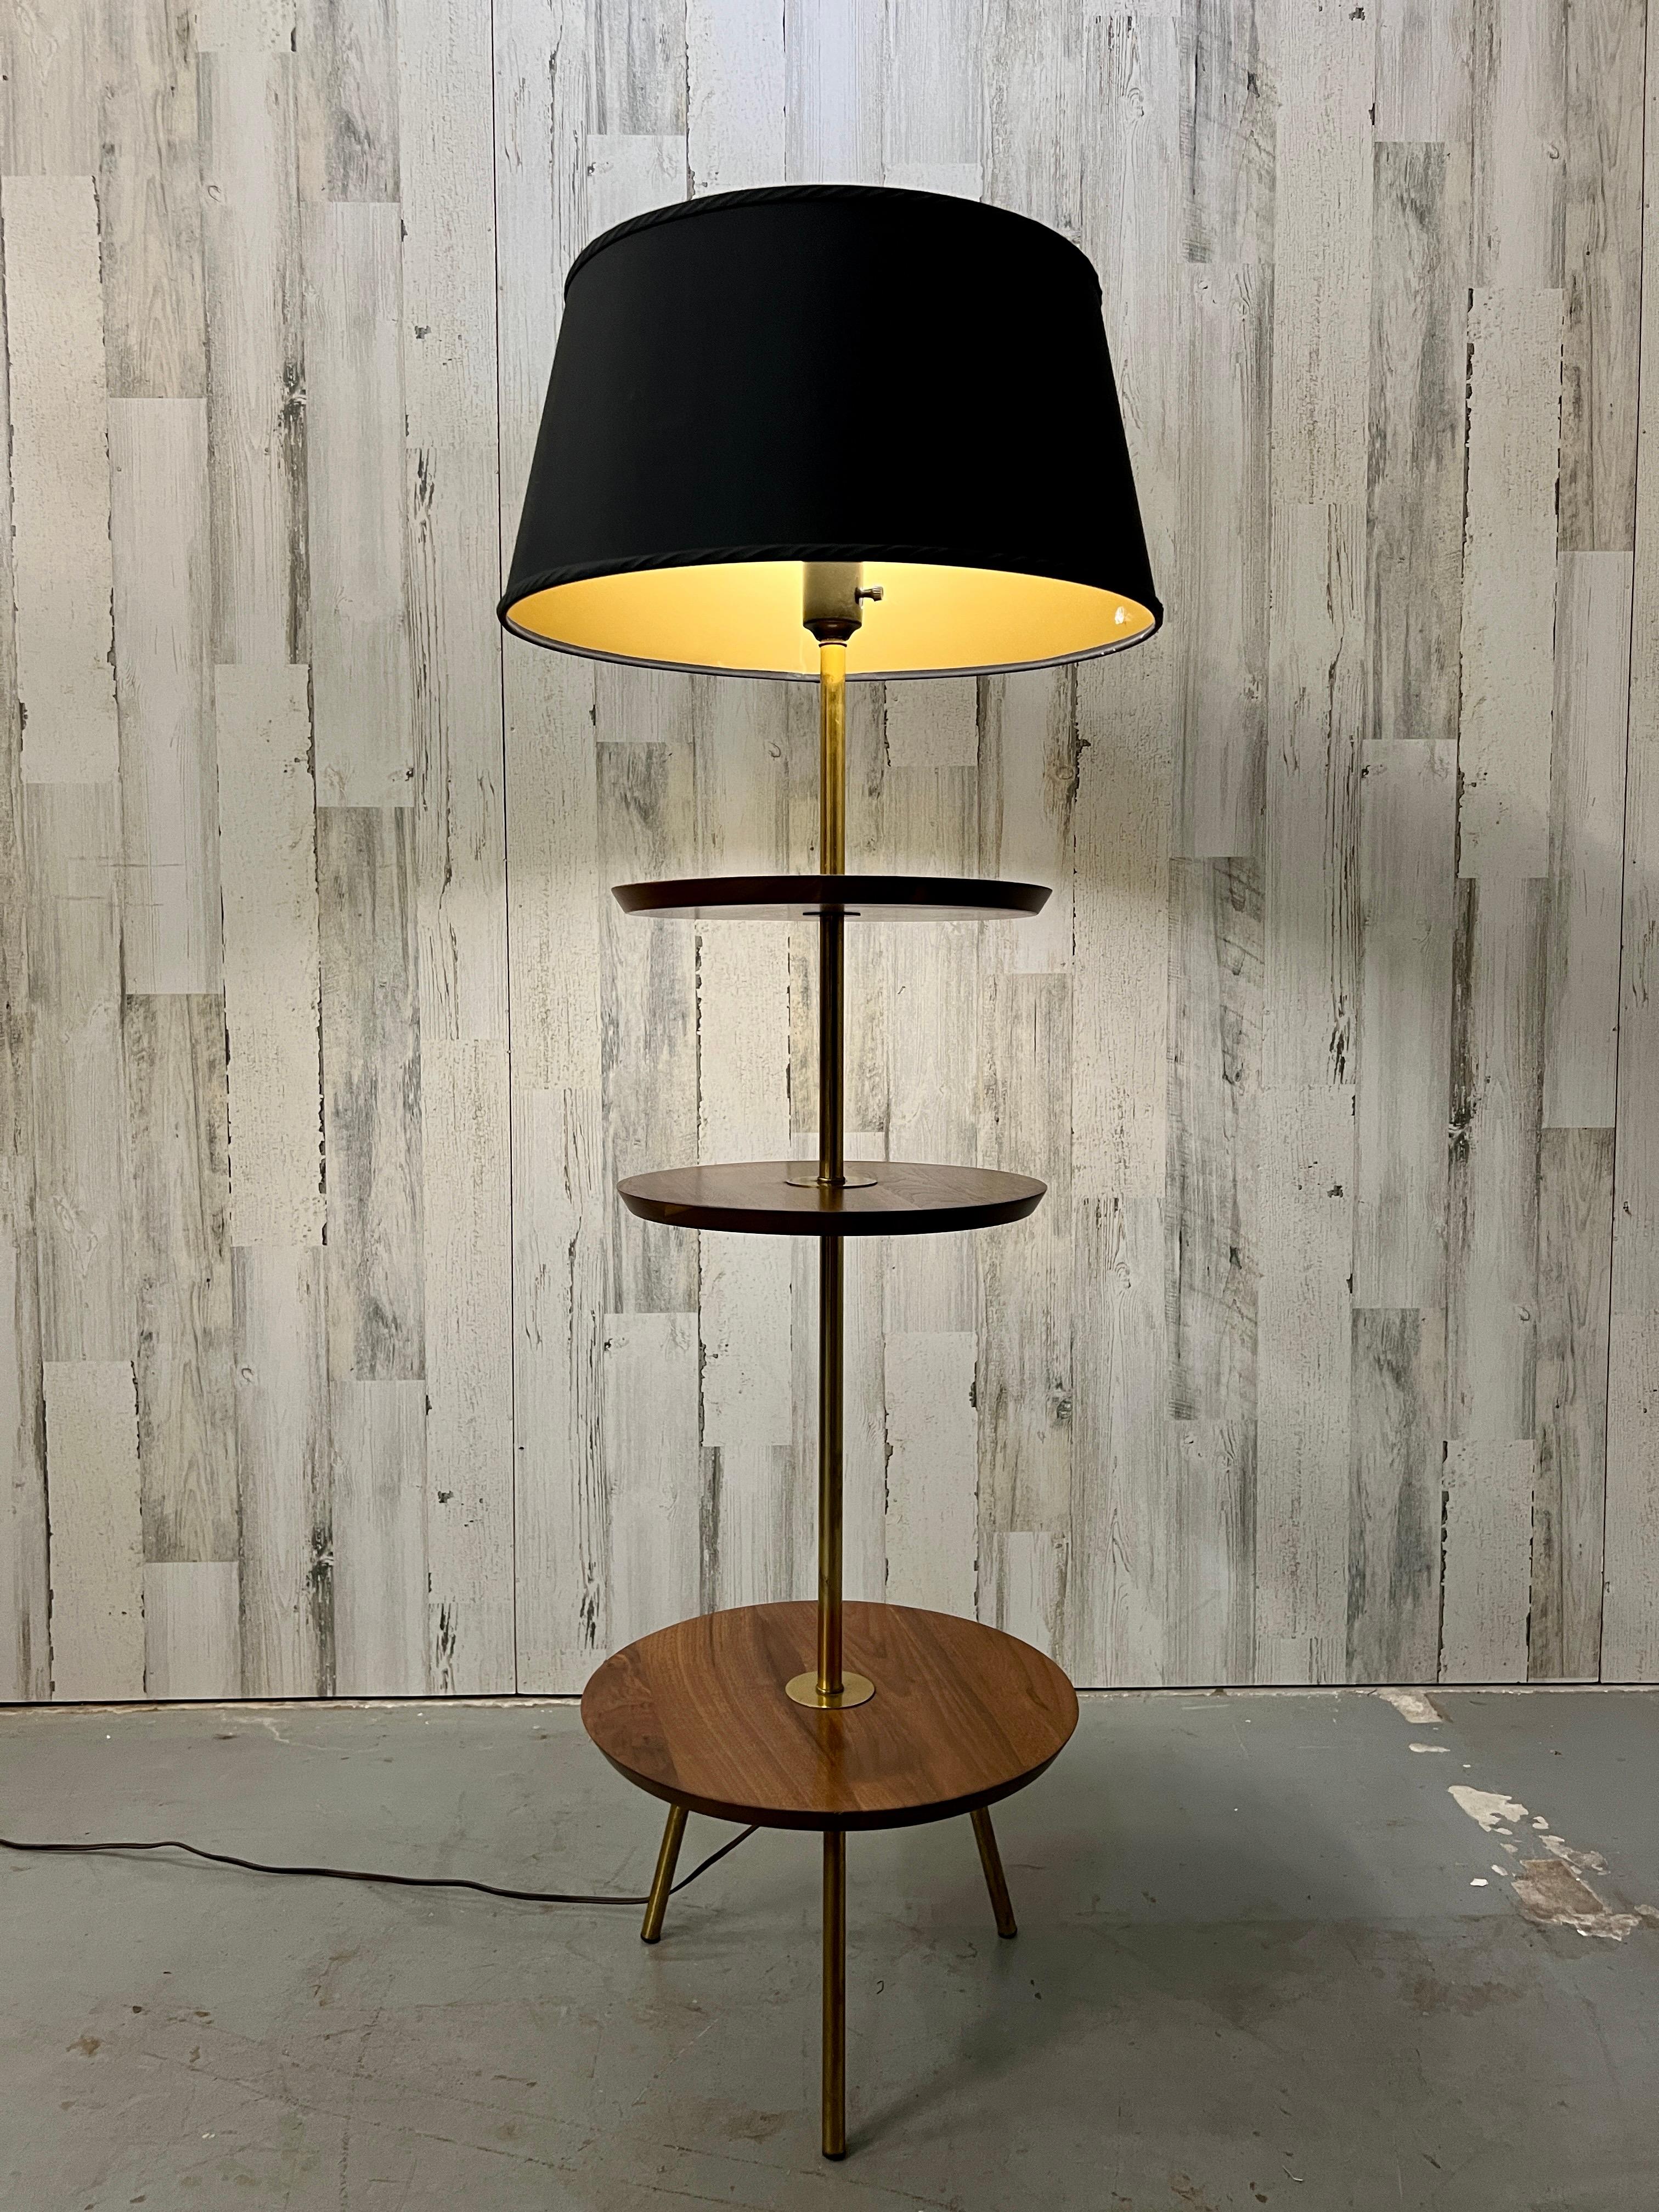 1960s Tri-Tiered Mid-Century Floor Lamp In Good Condition For Sale In Denton, TX